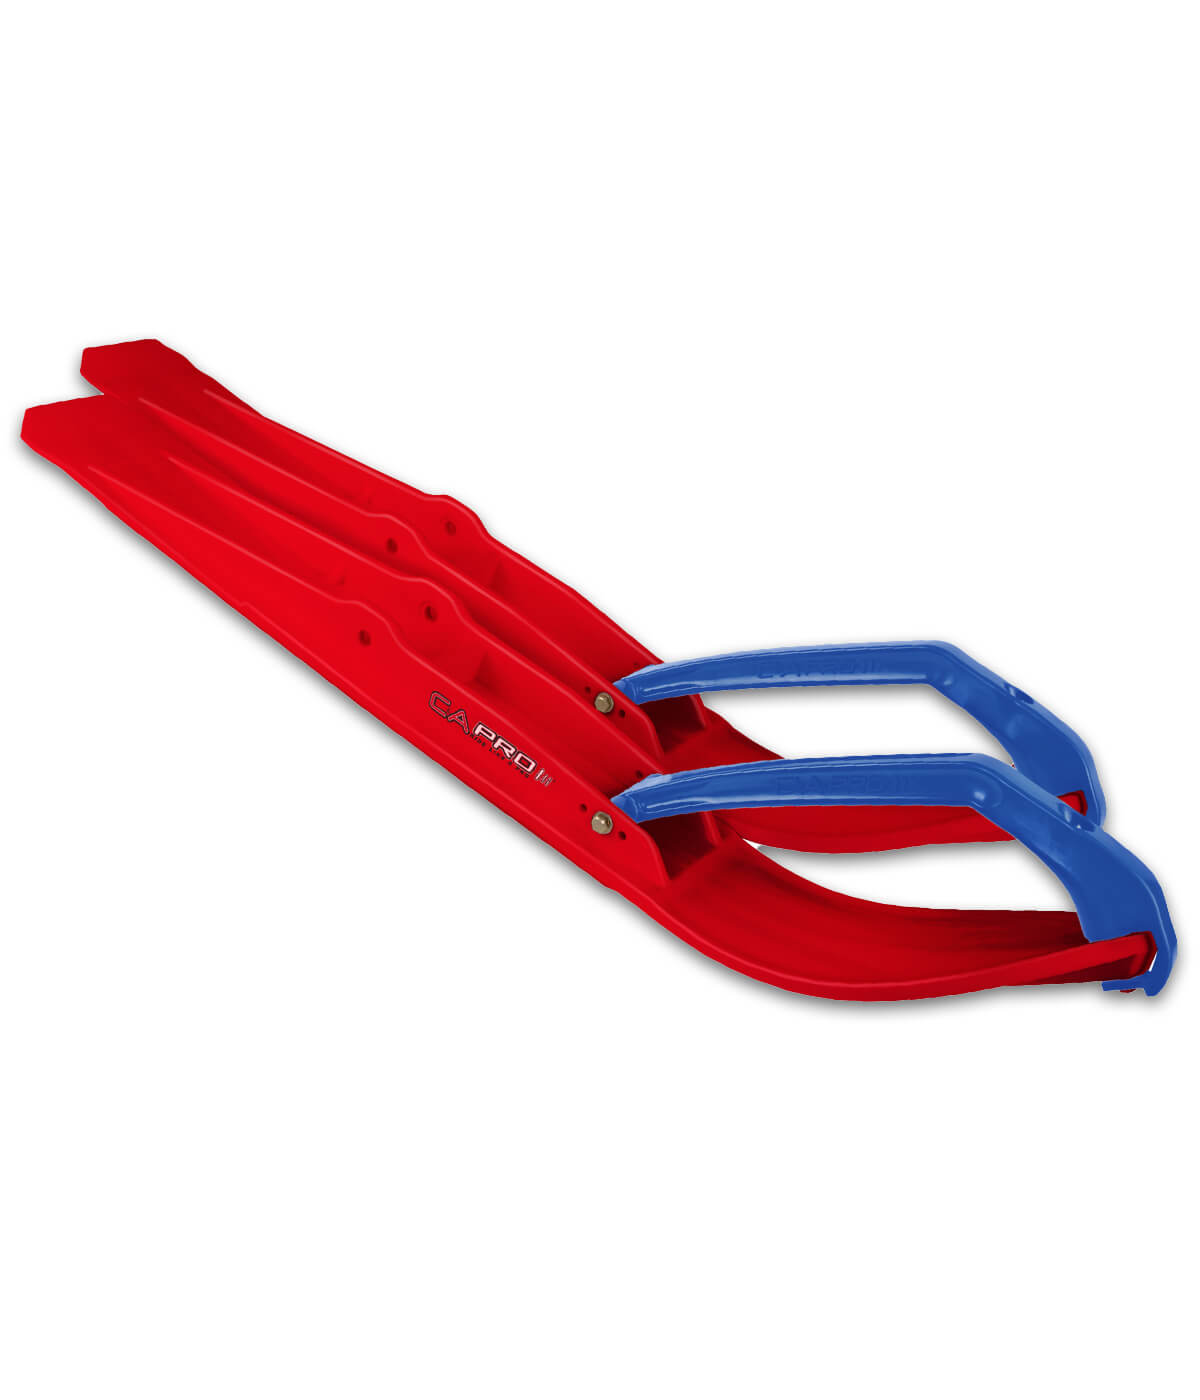 Red RZ skis with Blue handles